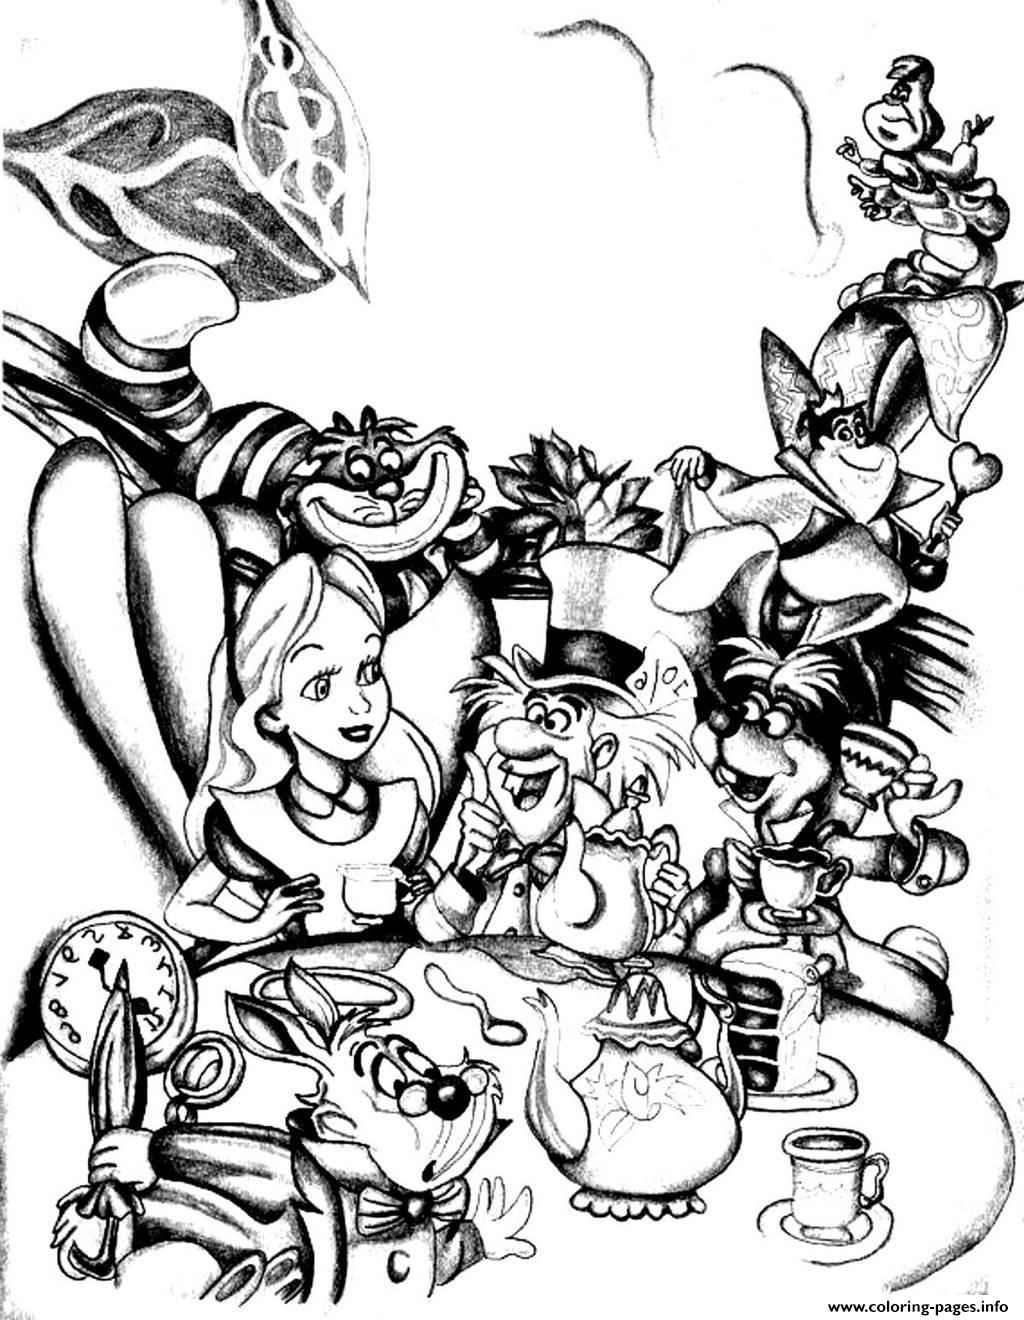 Disney Adult Coloring Book
 adult disney drawing alice in wonderland Coloring pages